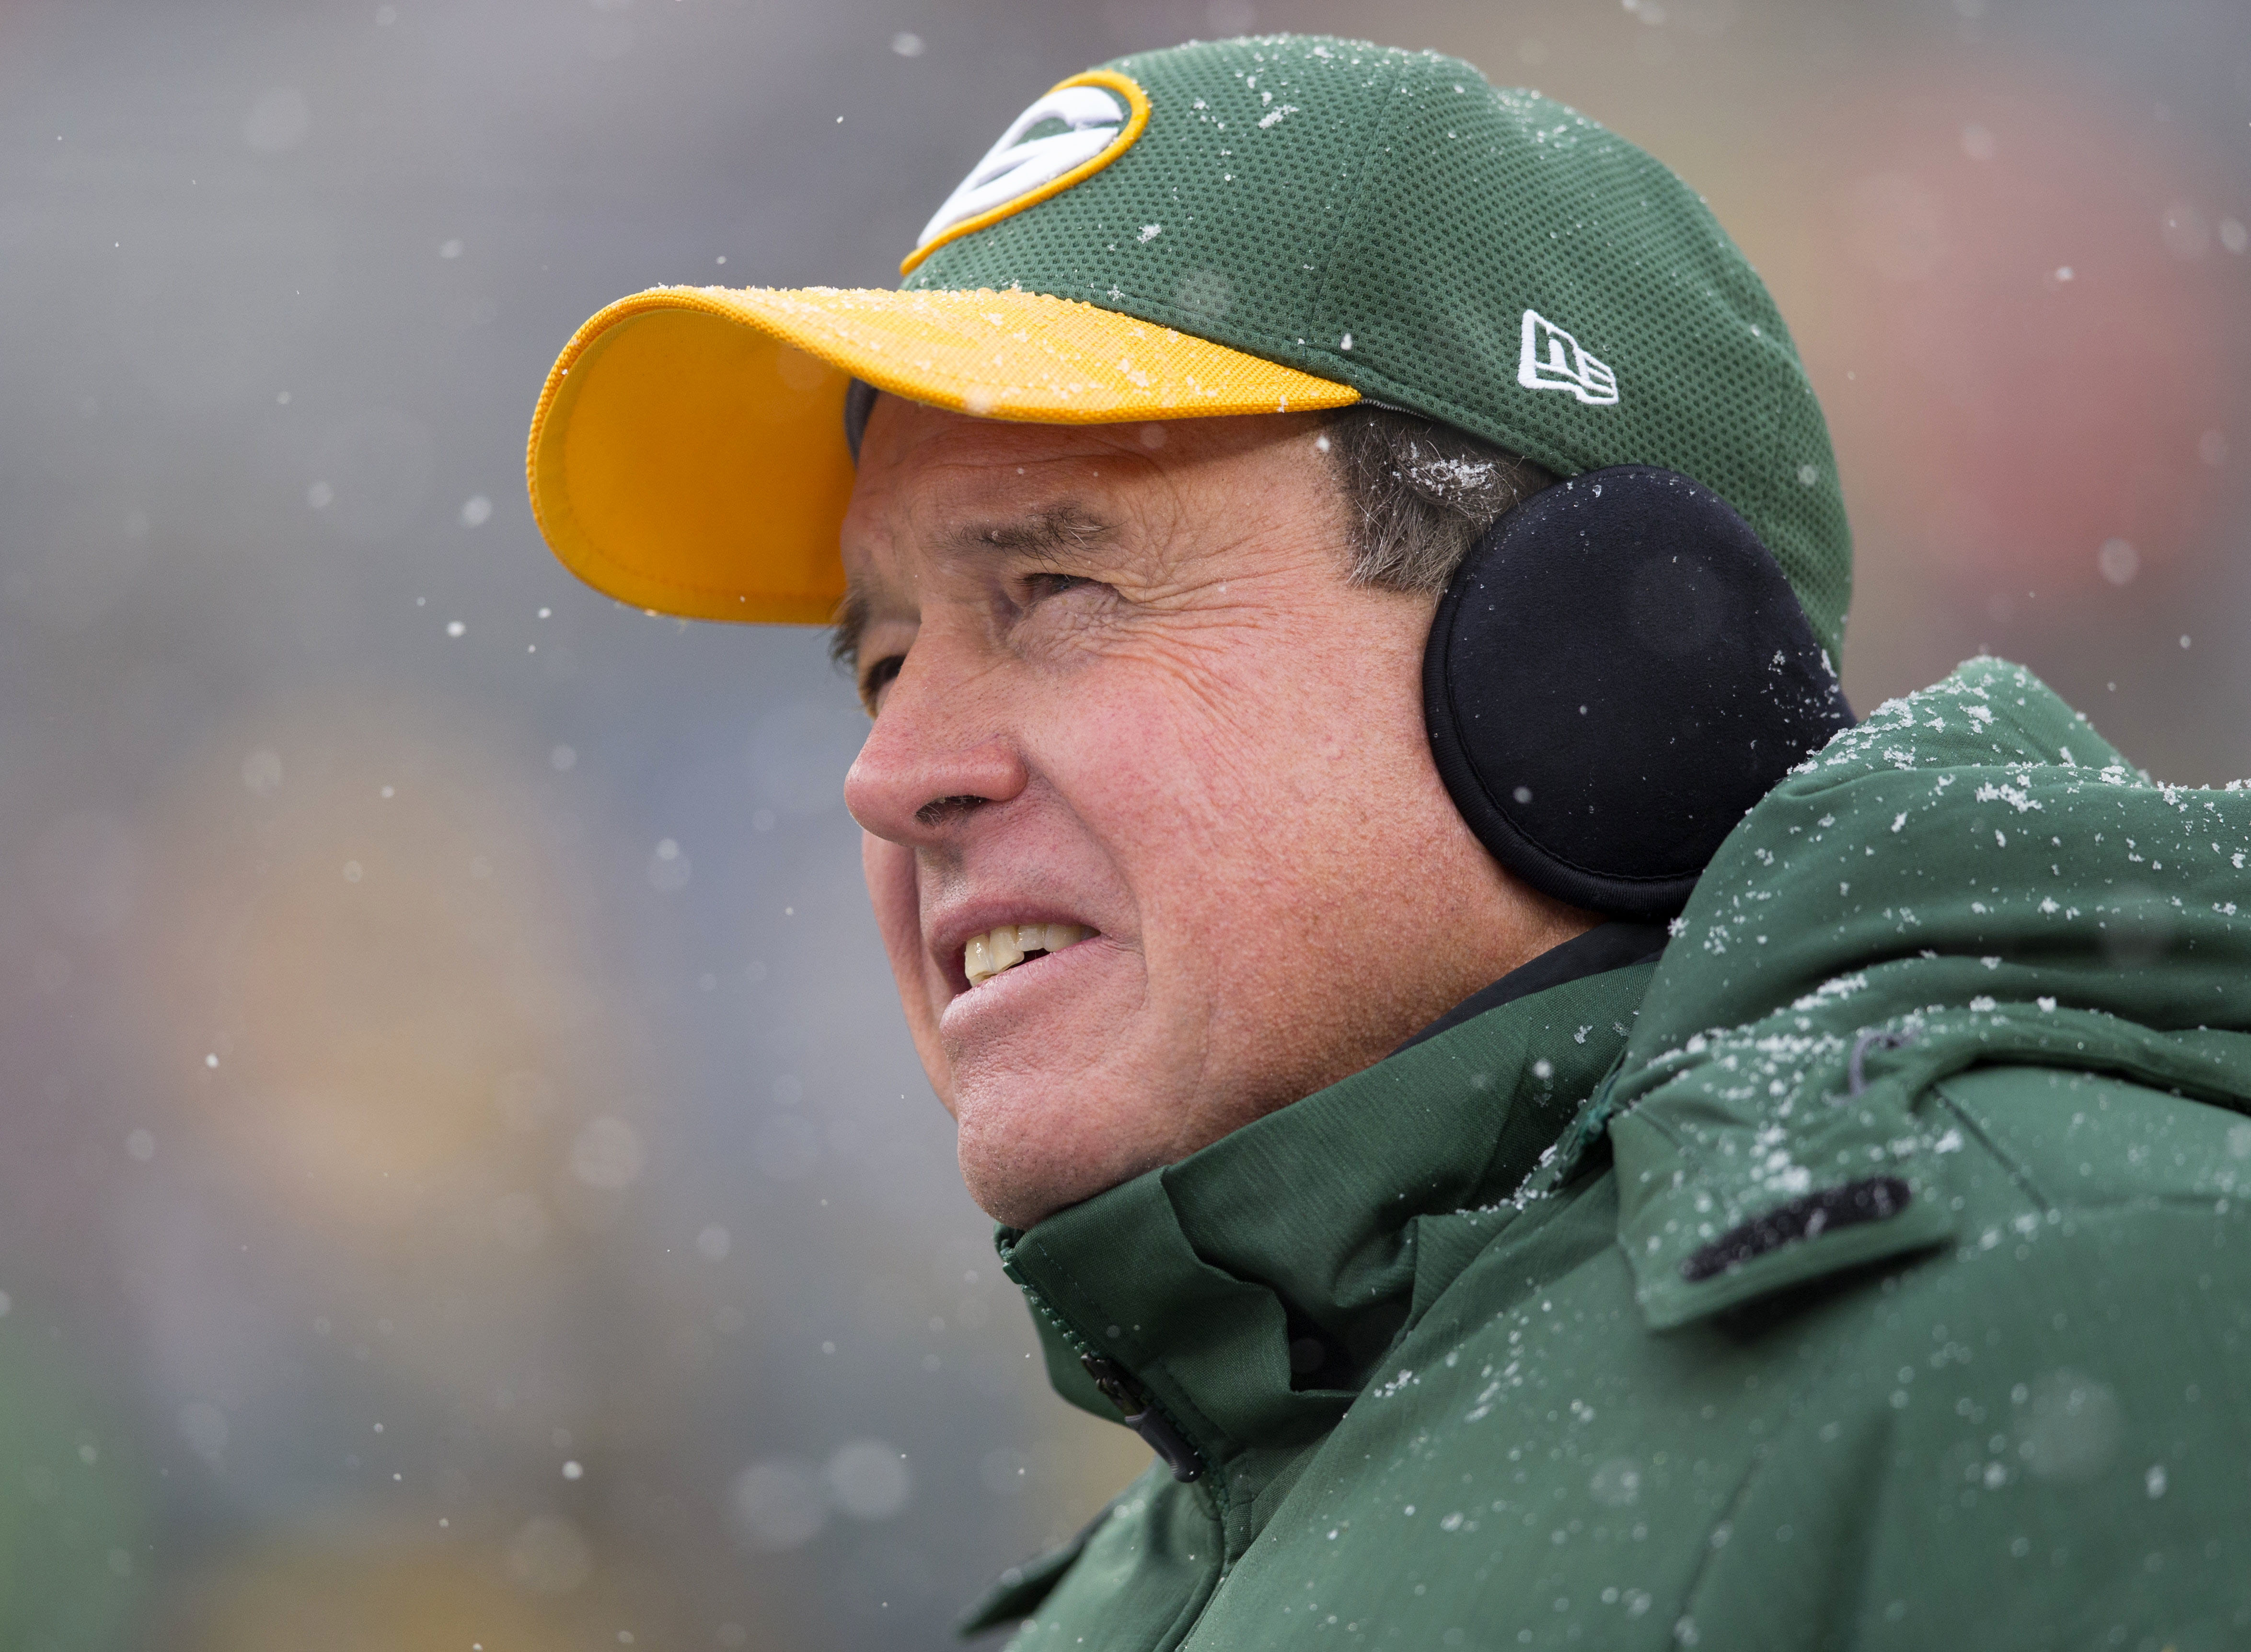 Bold: Dom Capers This and Way, Green